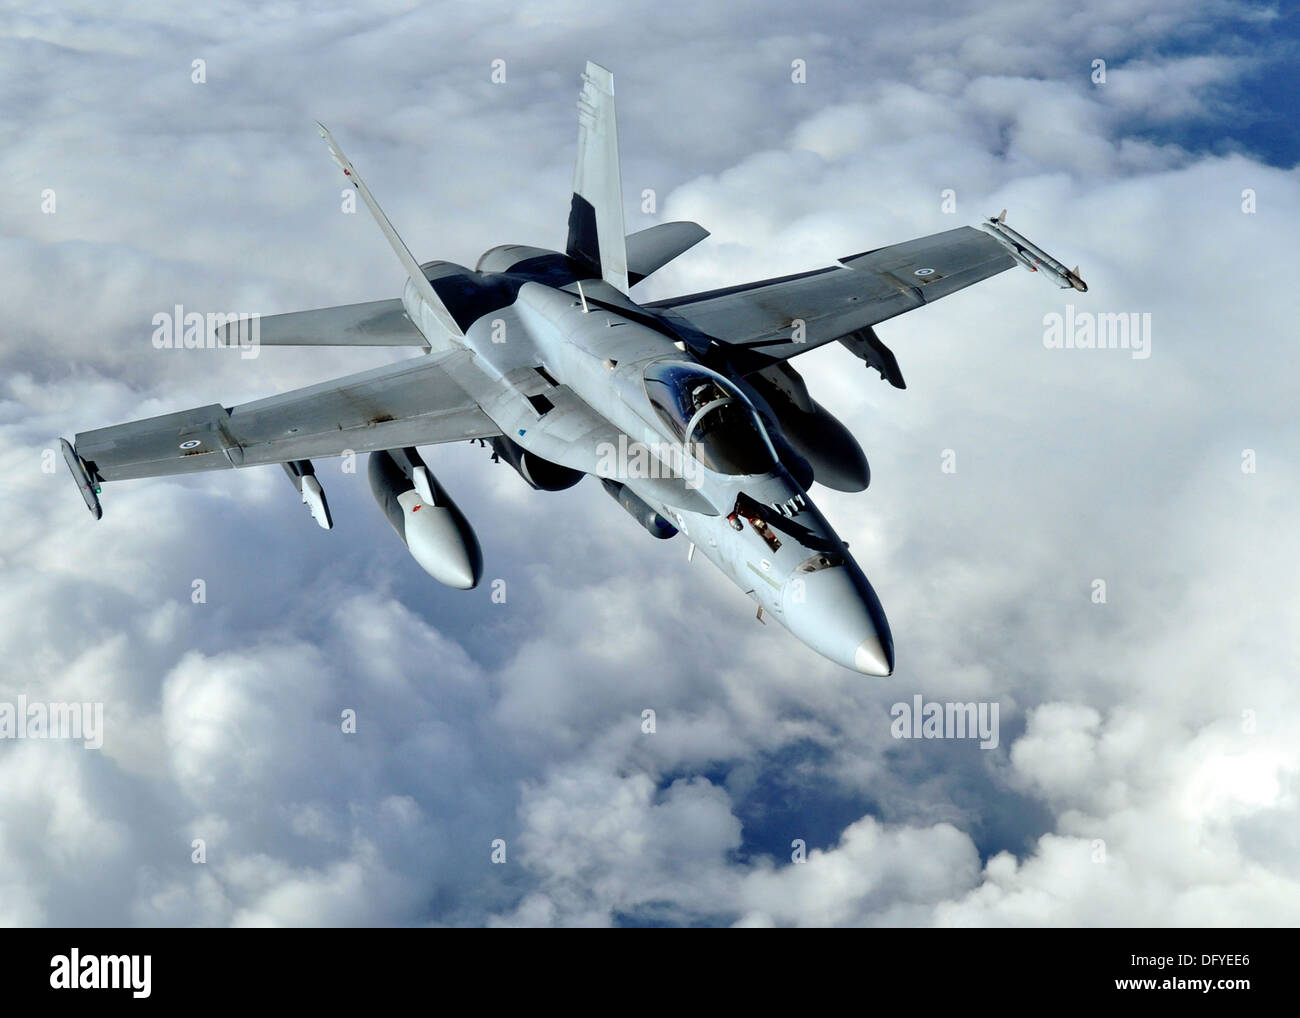 A Finnish F-18 Hornet fighter aircraft during the Arctic Challenge exercise September 24, 2013 over Norway. Stock Photo